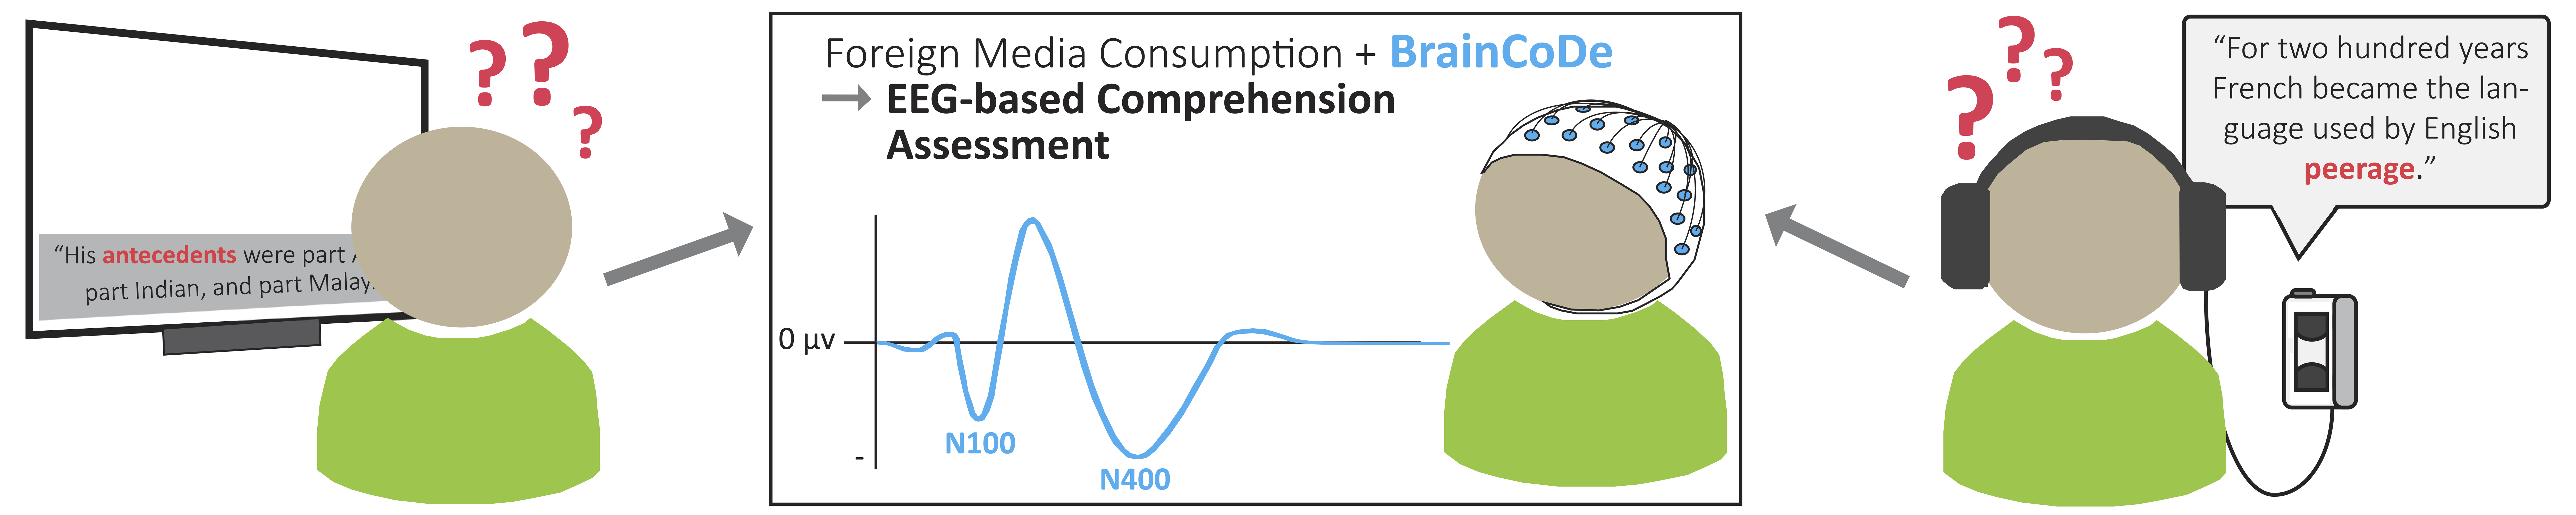 BrainCoDe: Electroencephalography-based Comprehension Detection during Reading and Listening